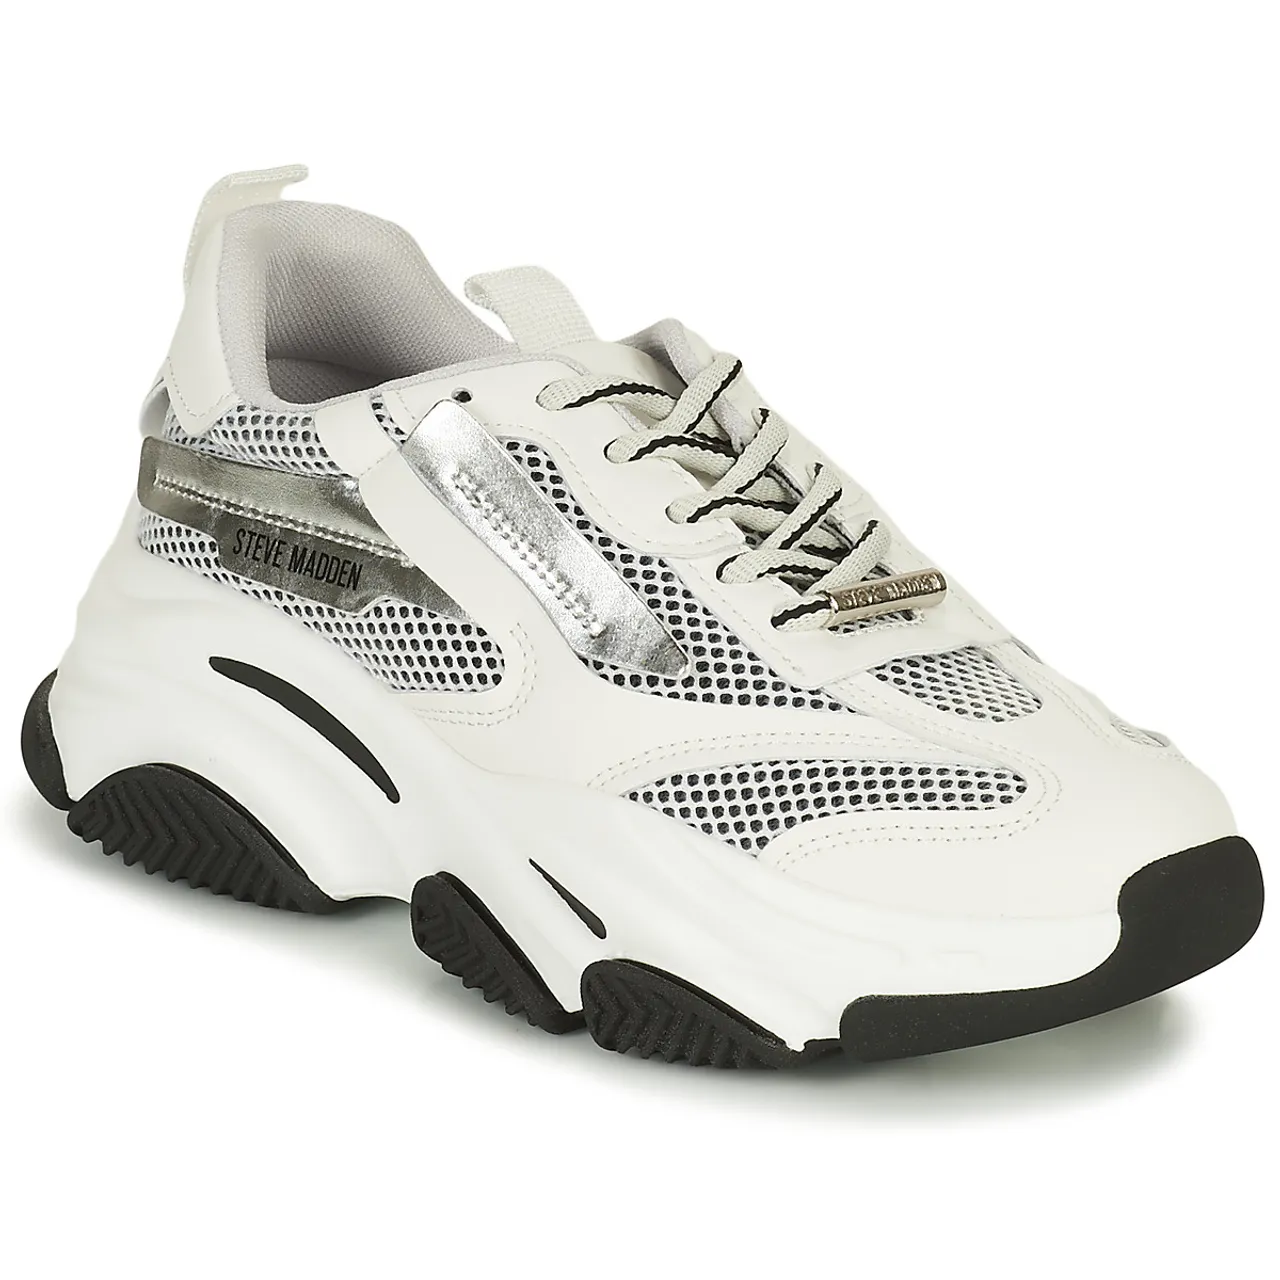 Steve Madden  POSSESSION  women's Shoes (Trainers) in White